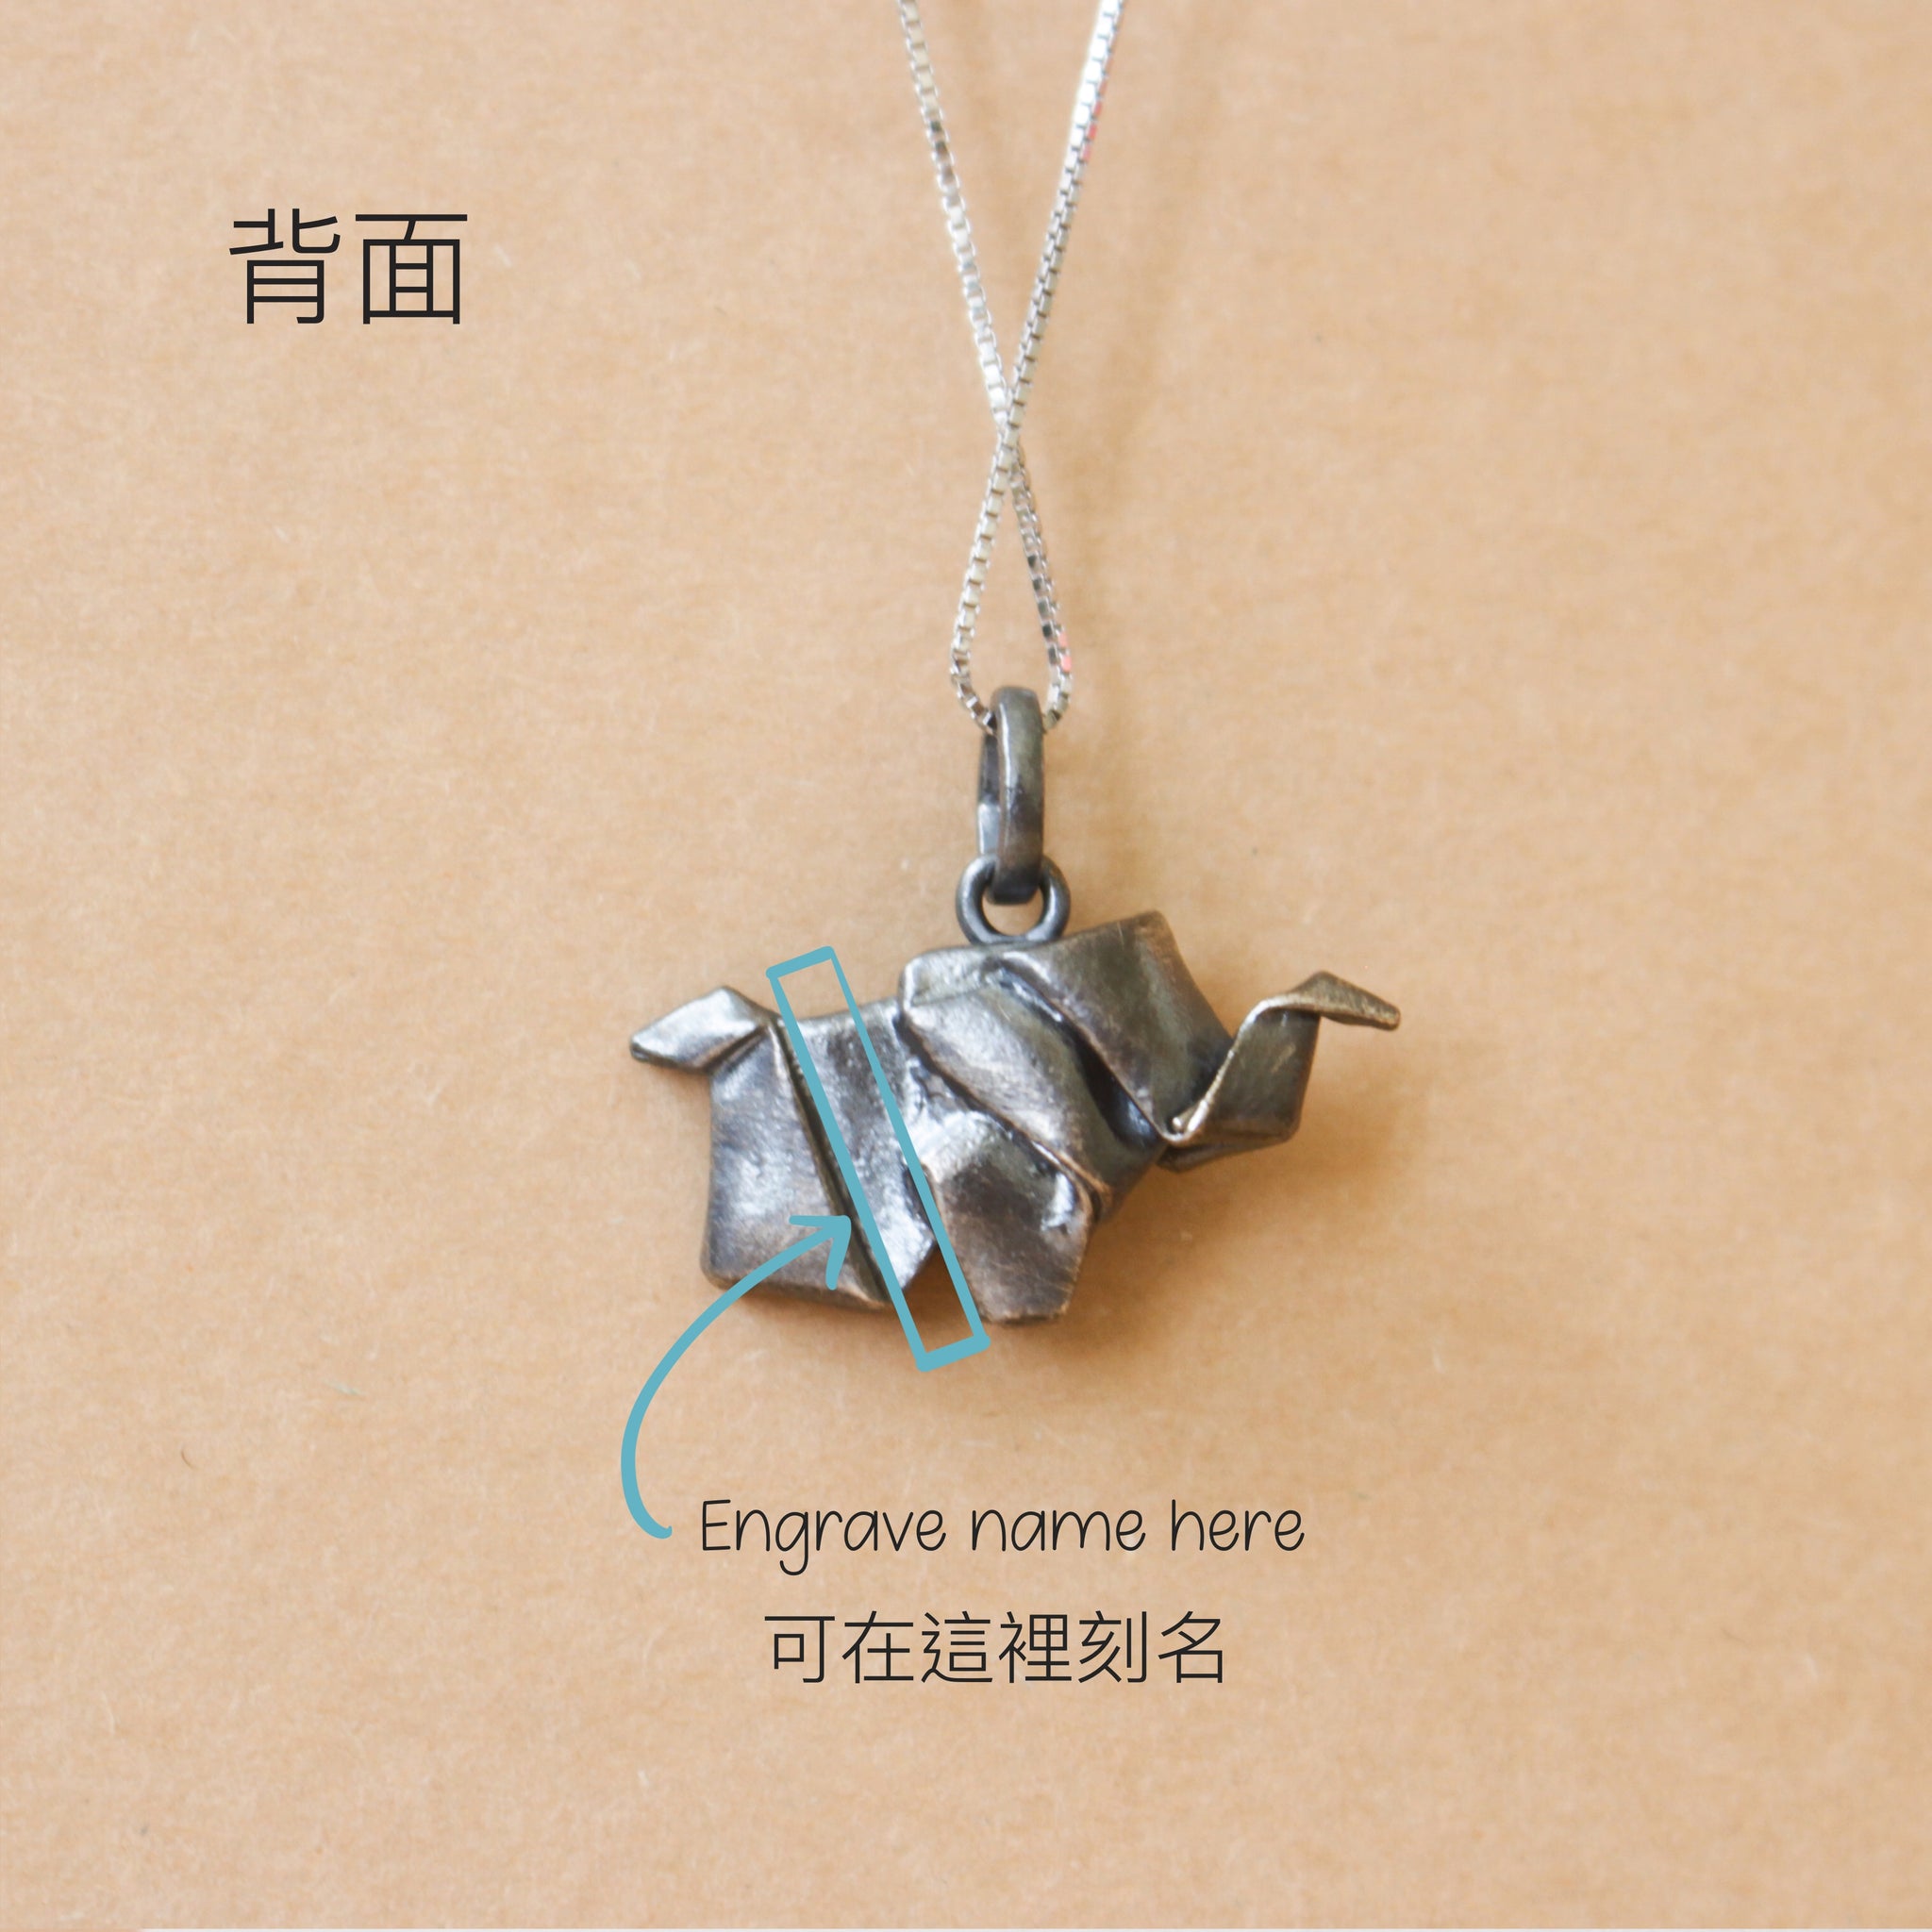 Black Silver Origami Small Elephant Necklace